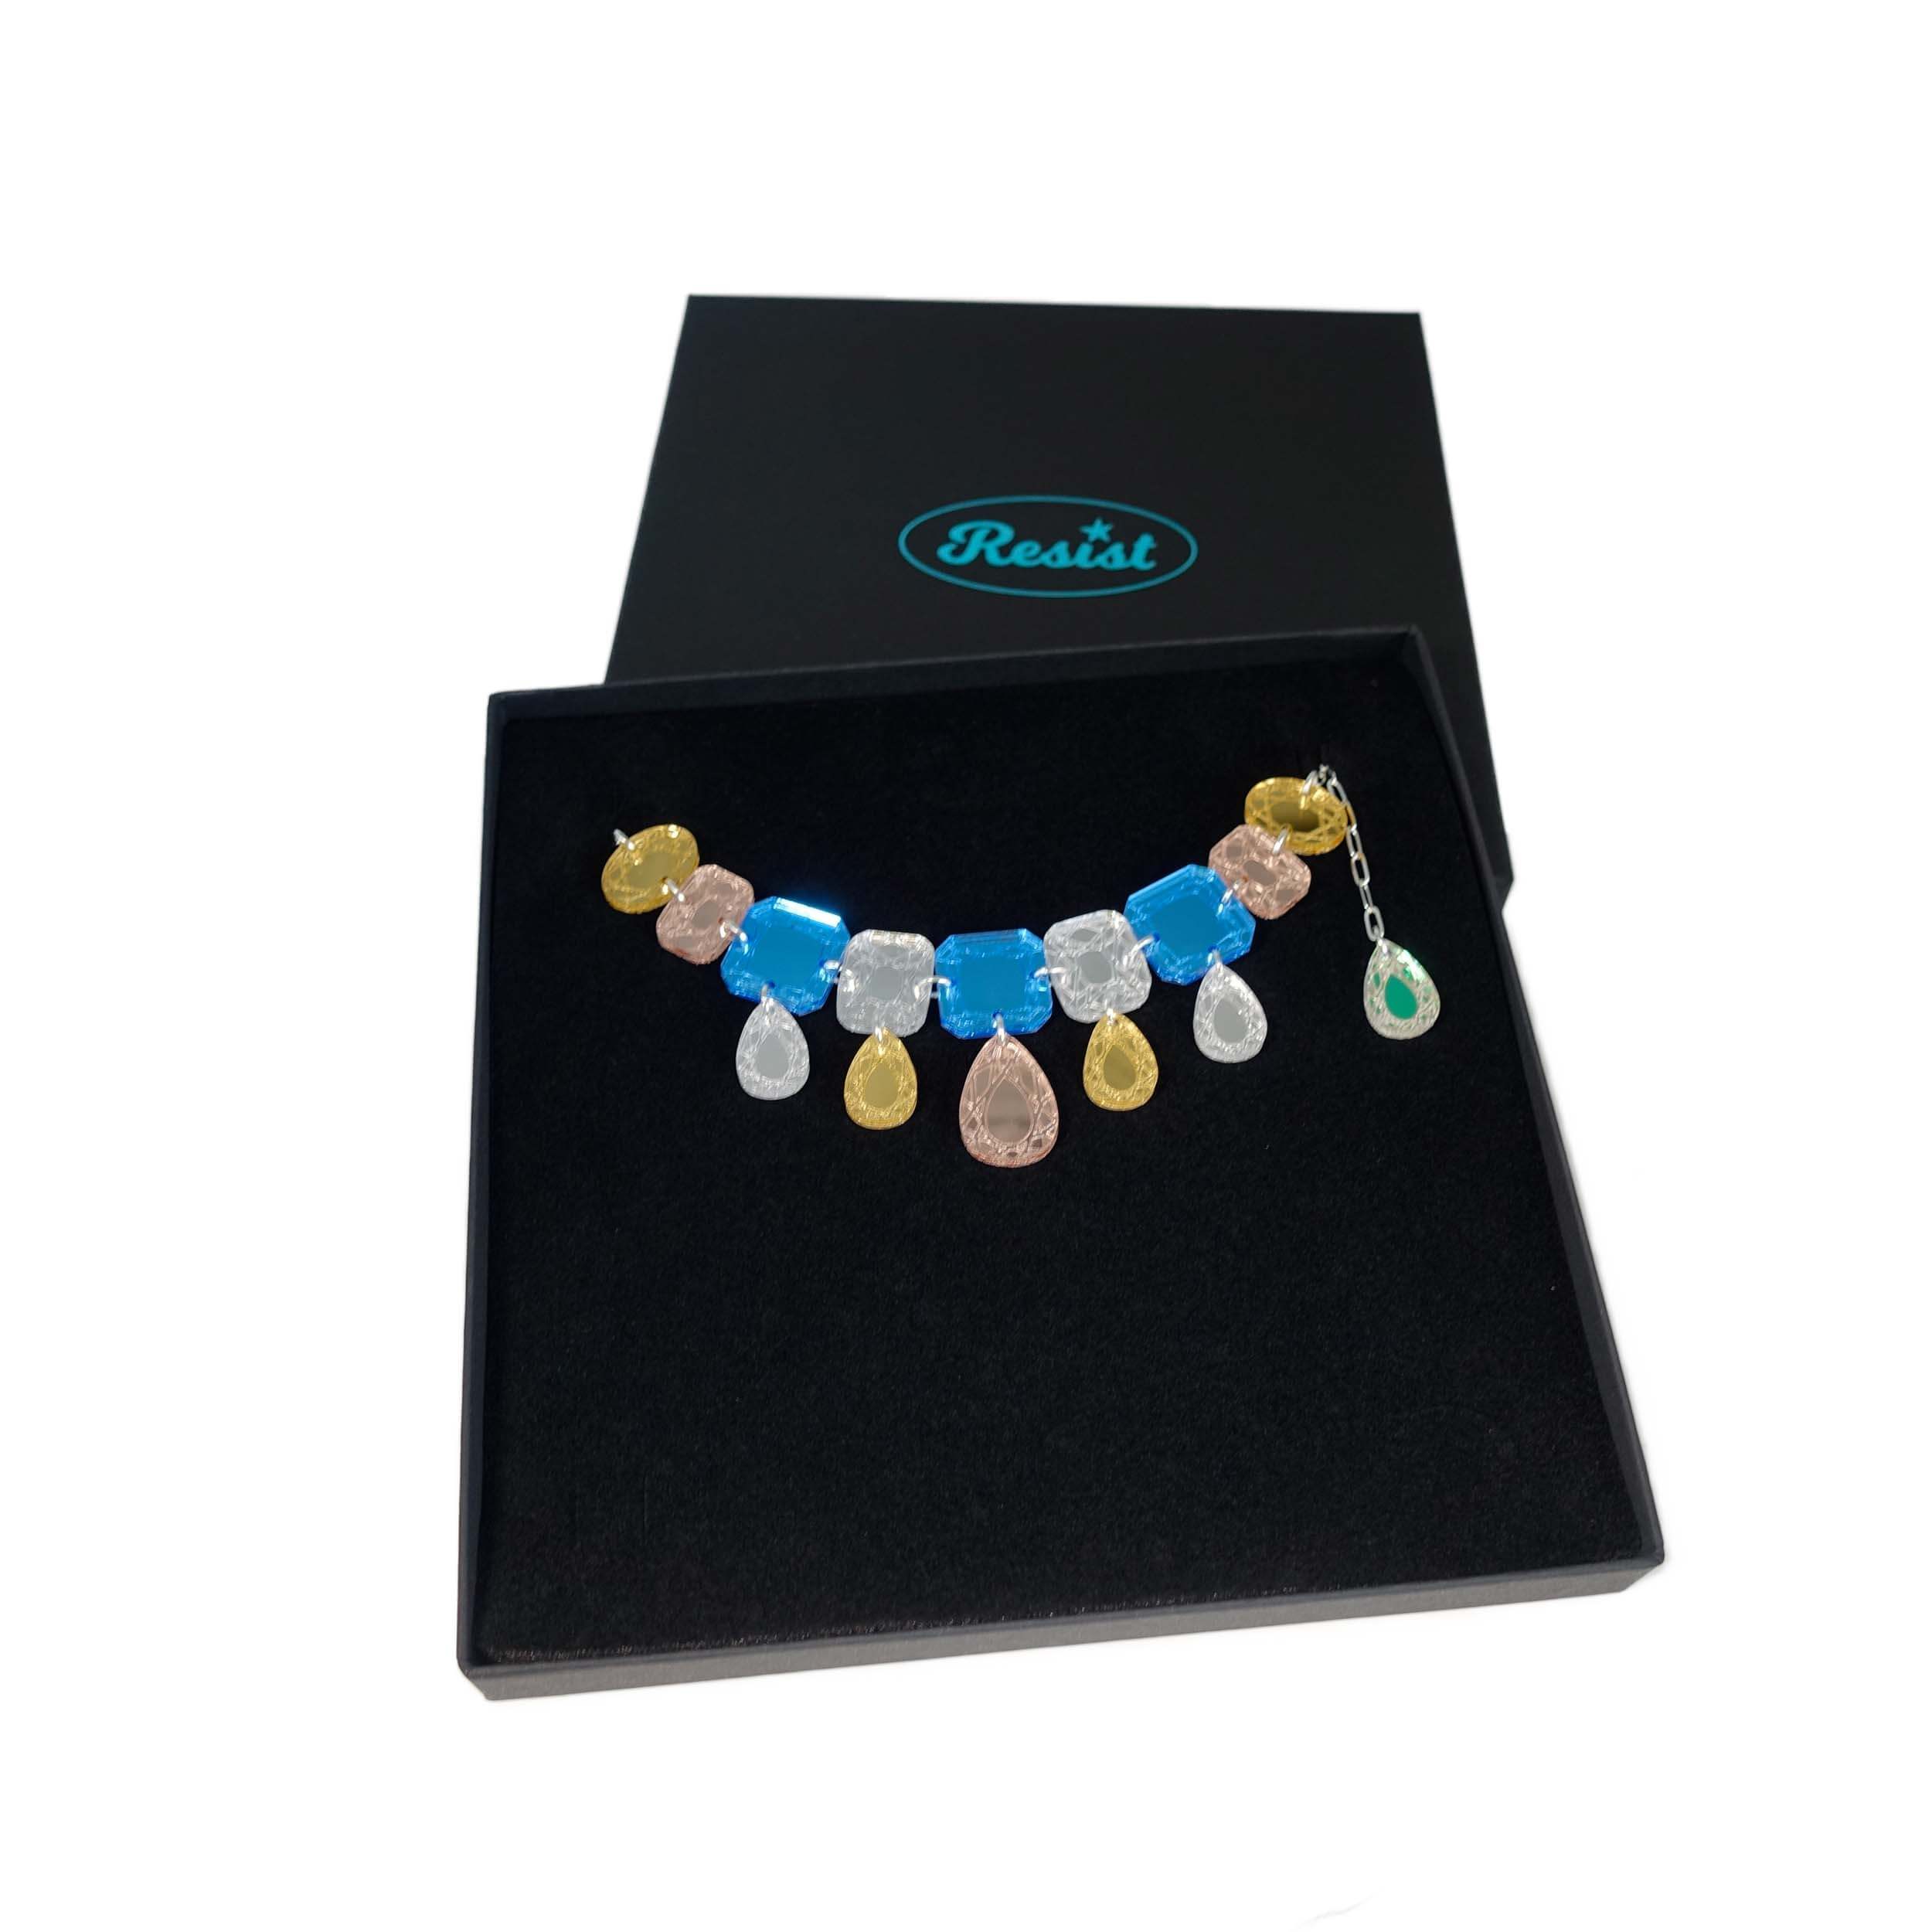 Austerity jewels necklace in soft blue colours, shown in a Wear and Resist gift box. 